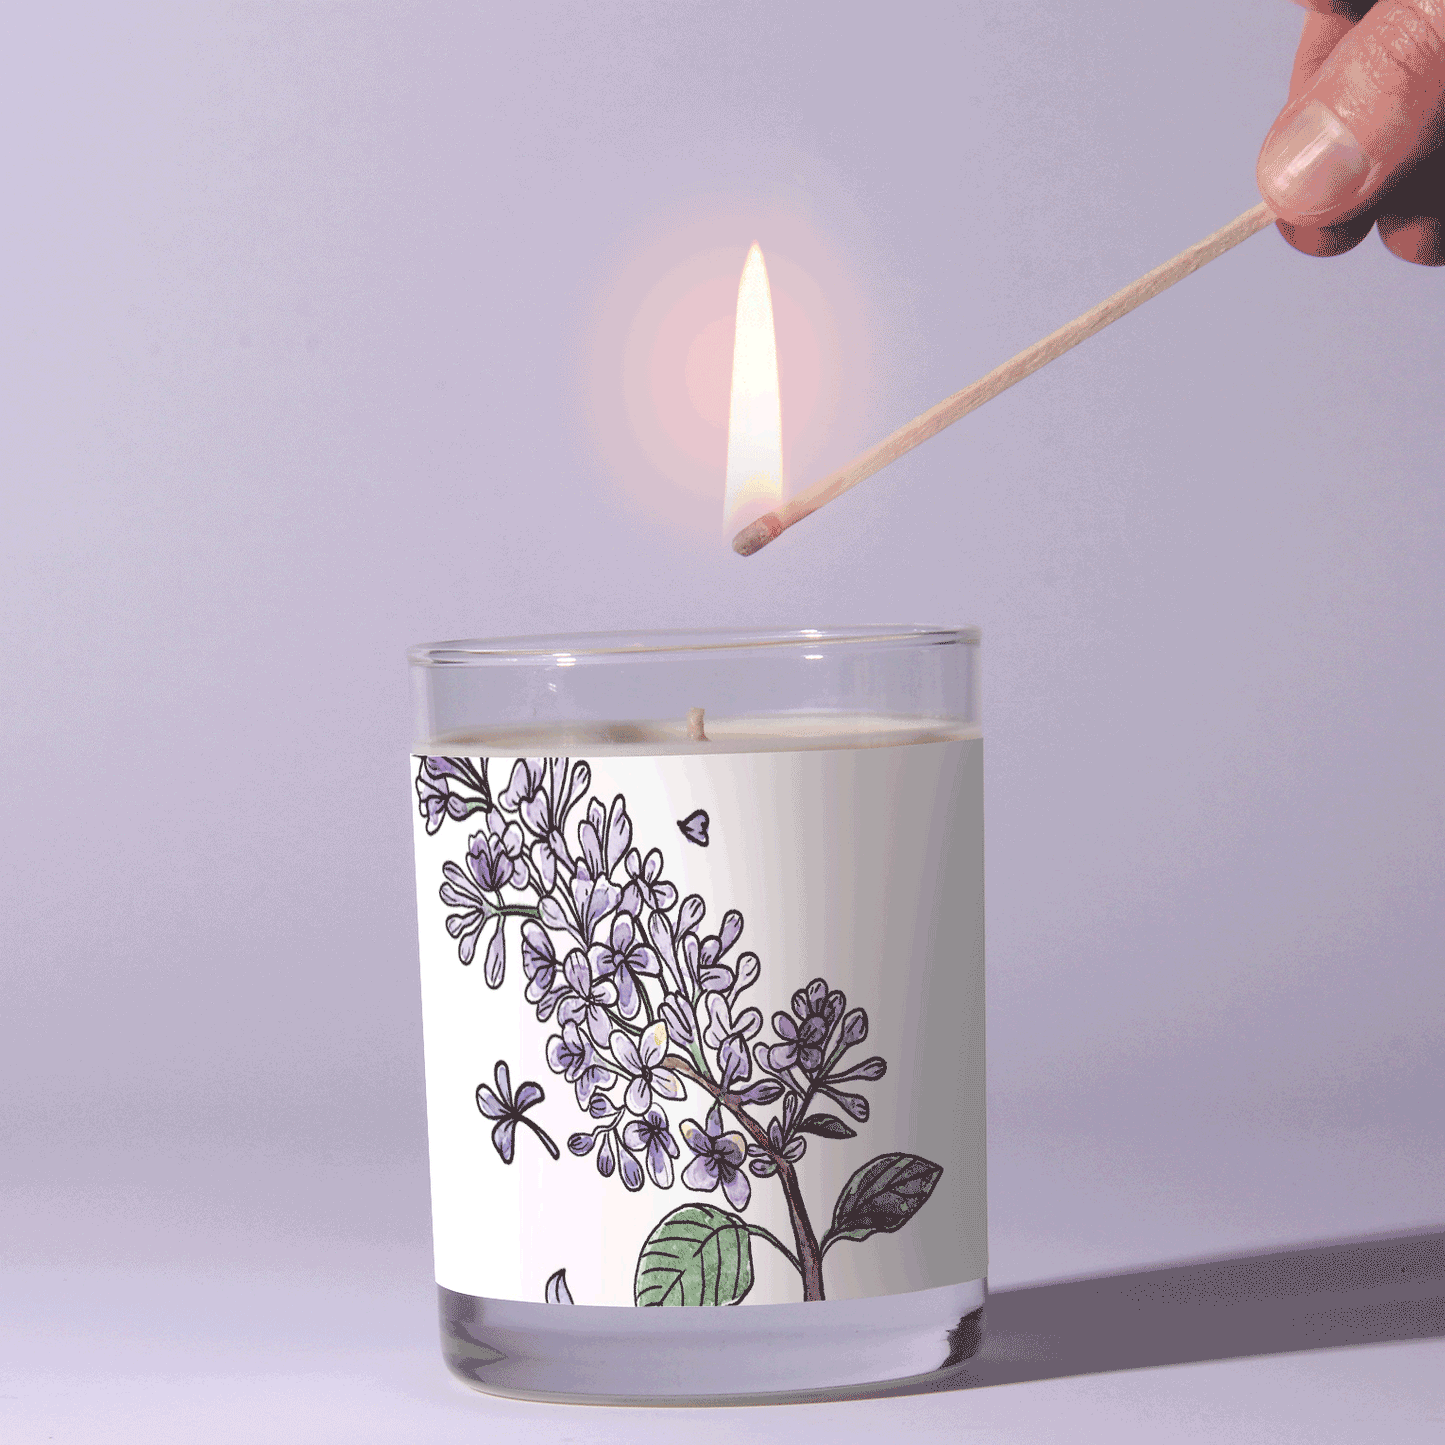 Lilac - Just Bee Candles